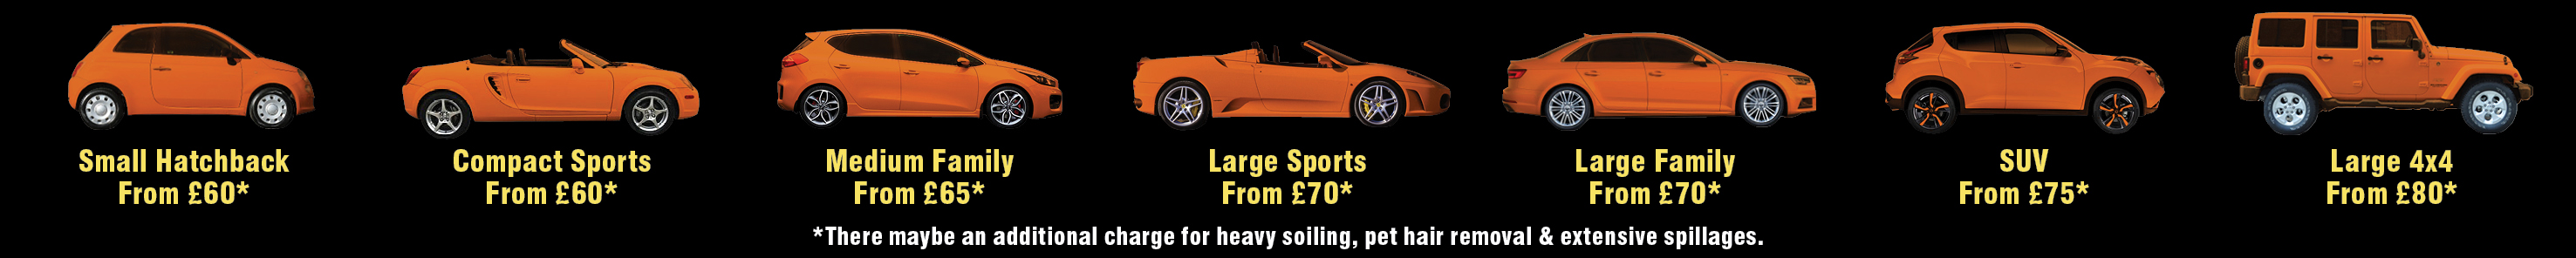 image banner showing car sizes and prices. Small hatchback from £60 Large 4x4 from £80.